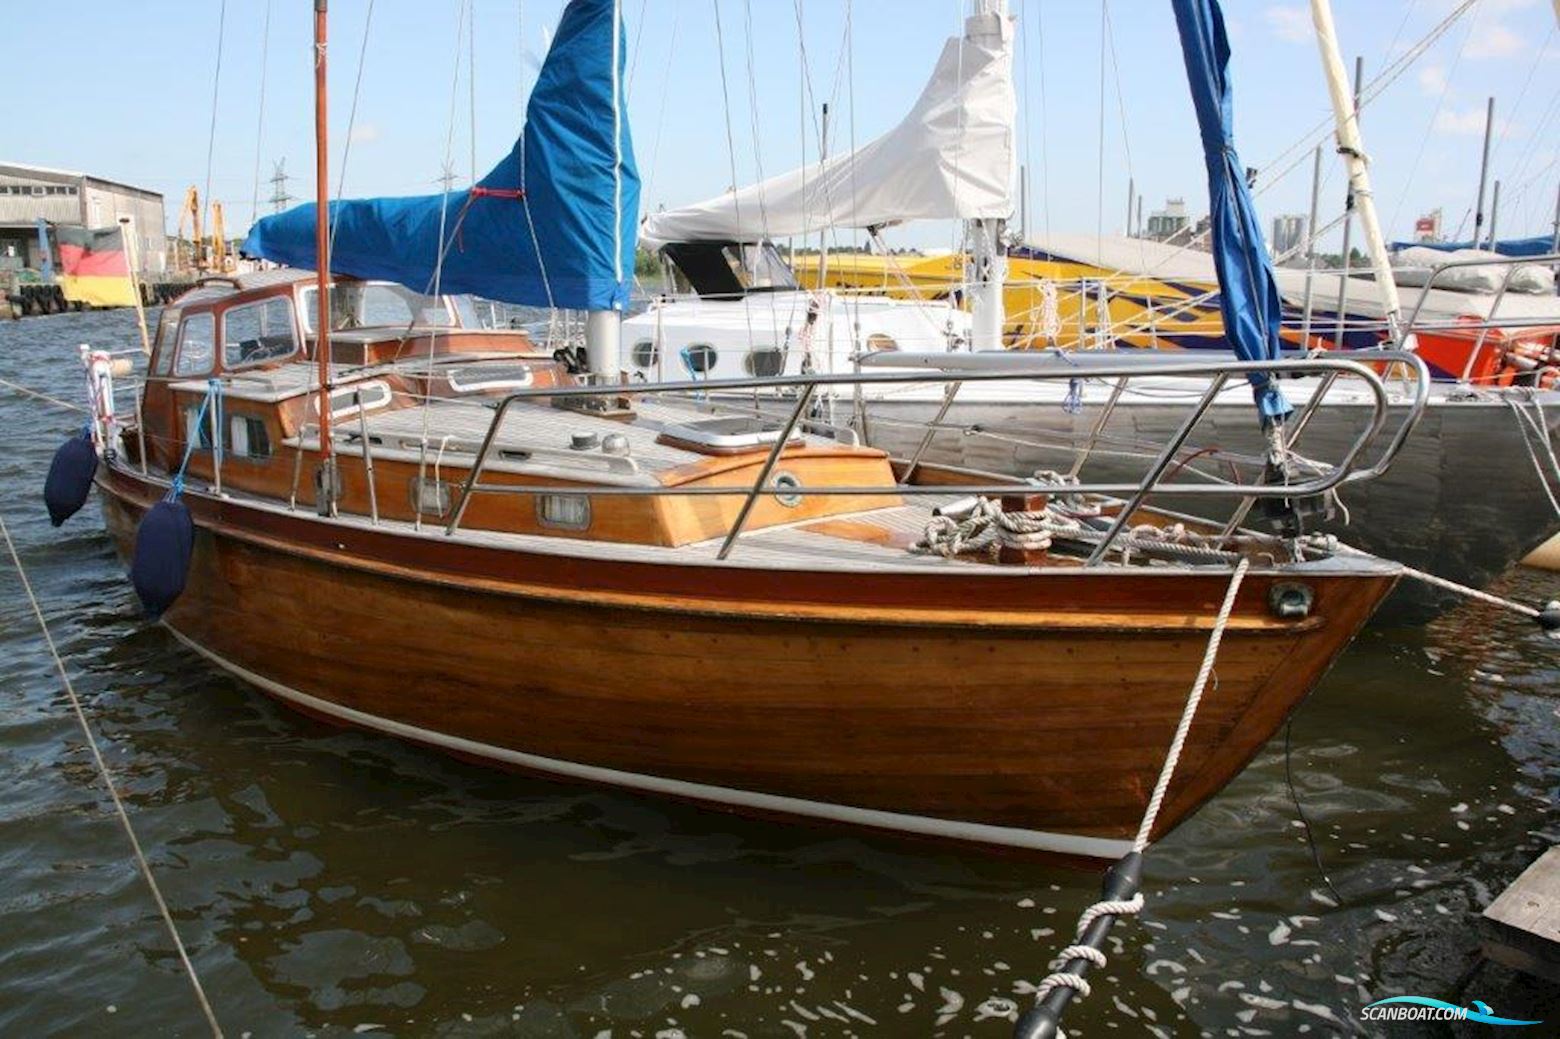 W. Grell 6,5 KR-Yacht Sailing boat 1962, with Mercedes-Benz OM636 engine, Germany